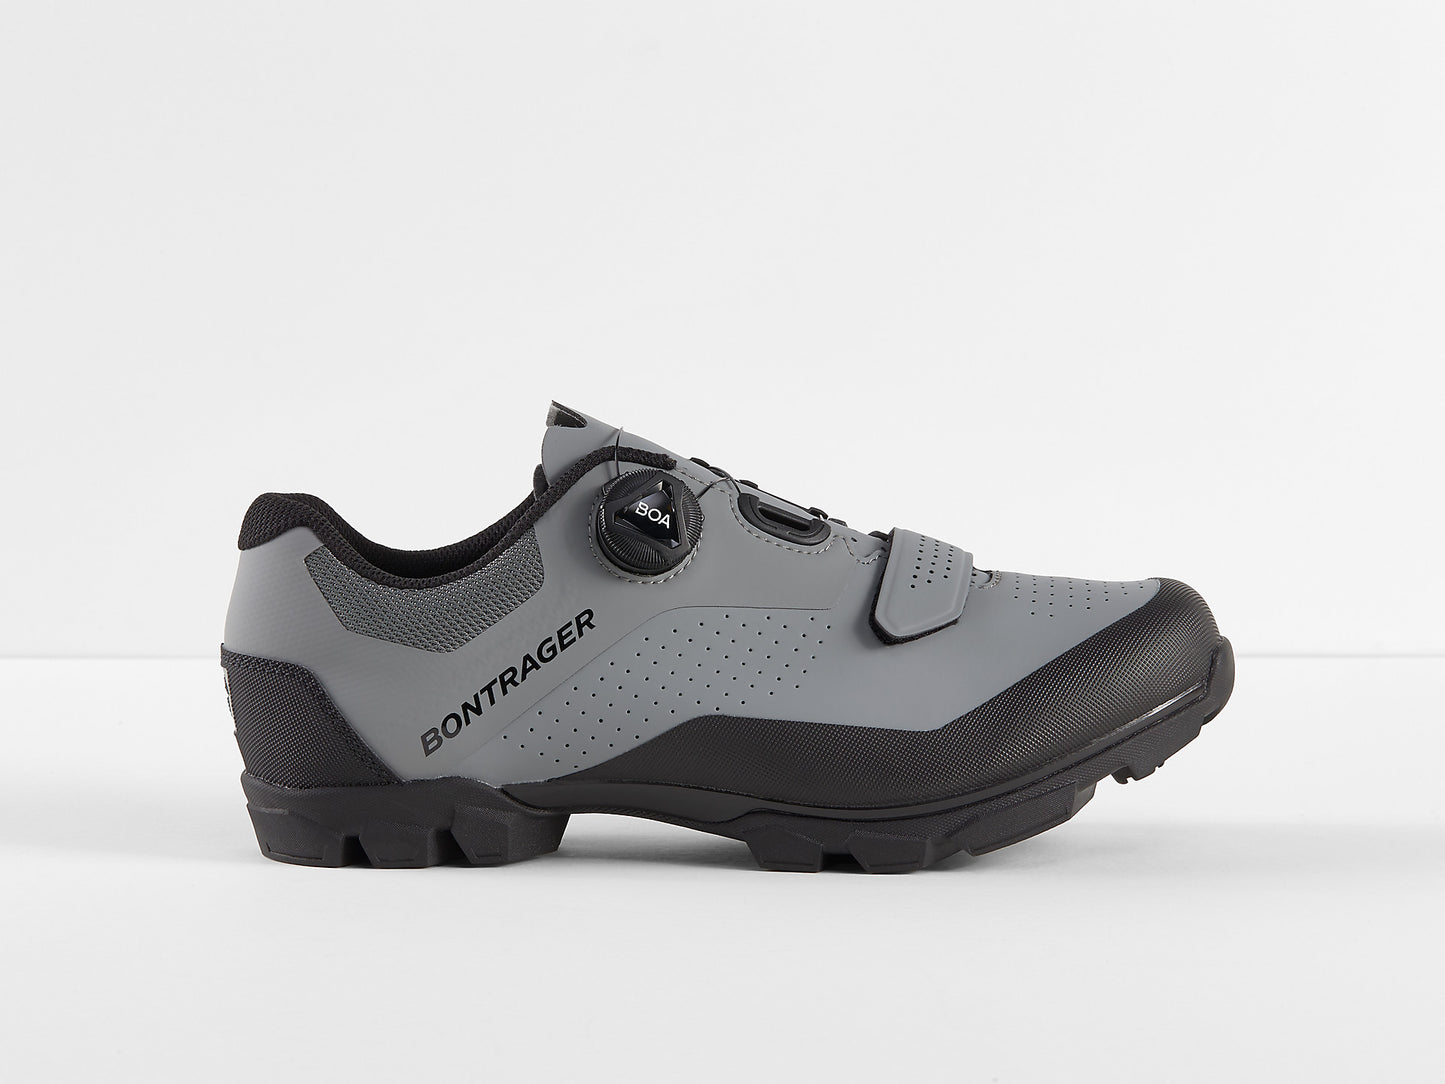 BONTRAGER - FORAY MOUNTAIN BIKE SHOE (SAVE 50% NOW! ENTER CODE BONTRAGER50 AT CHECK OUT)